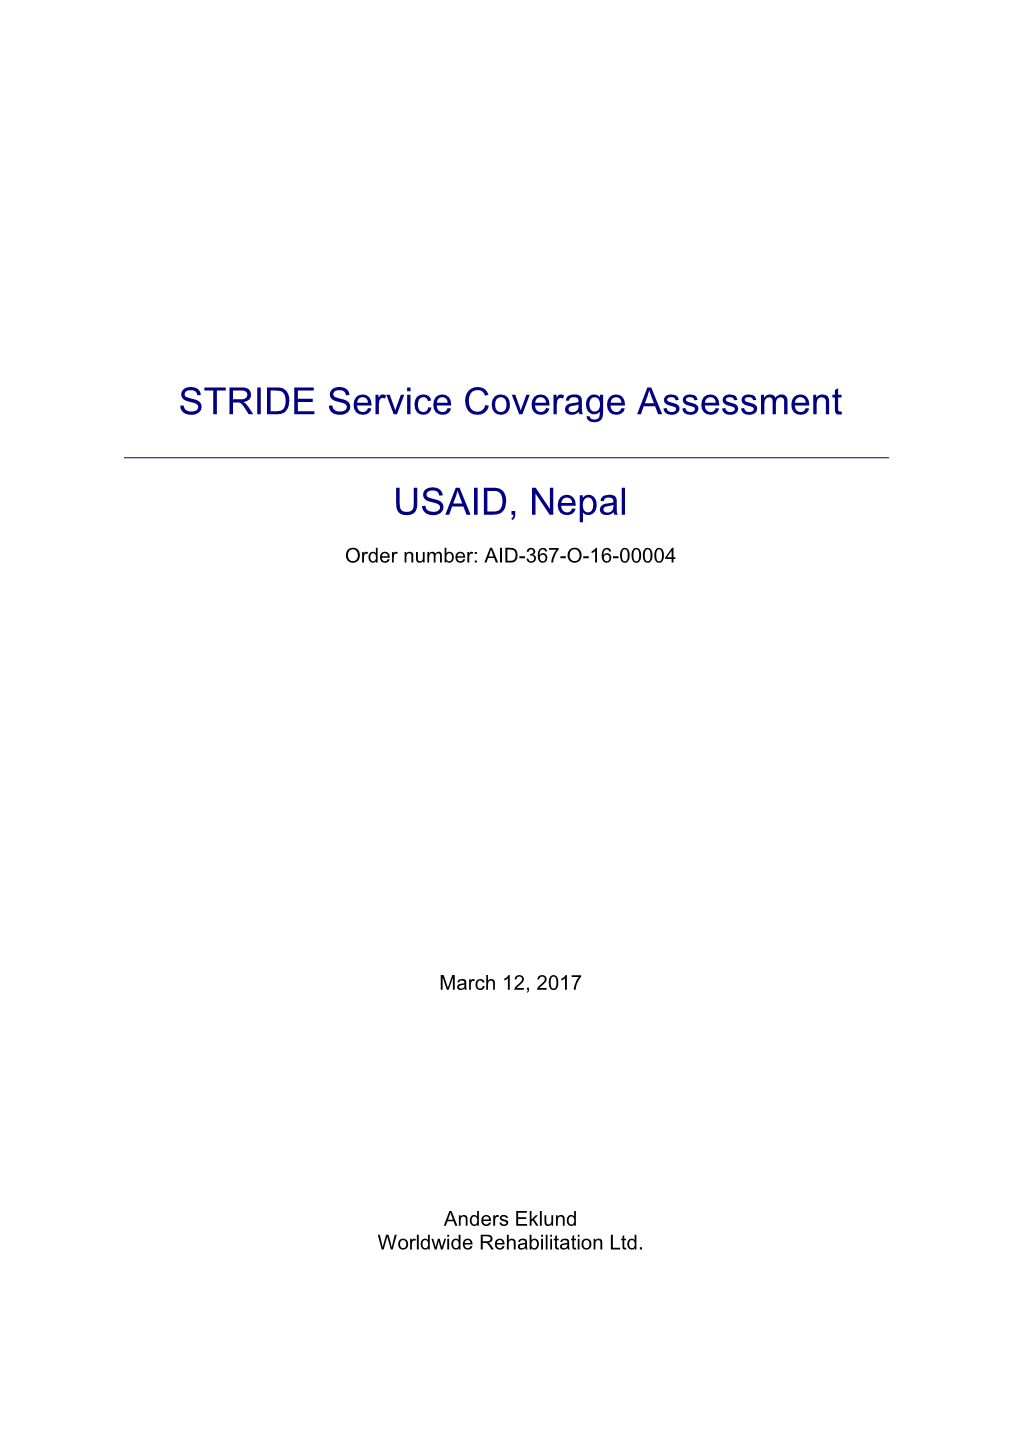 STRIDE Service Coverage Assessment USAID, Nepal